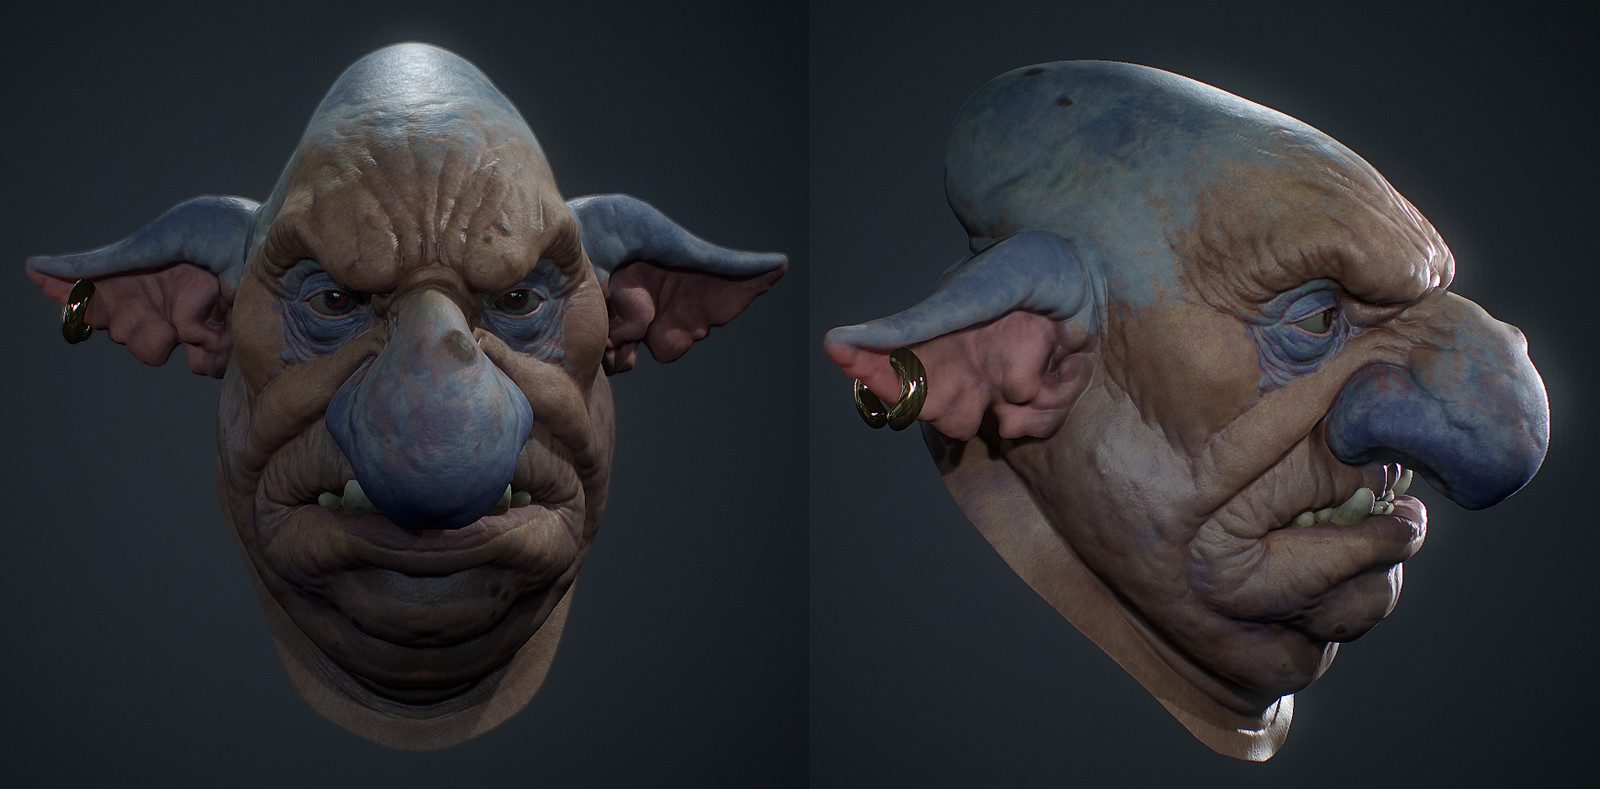 Further texturing in Substance and Marmoset Toolbag 3.